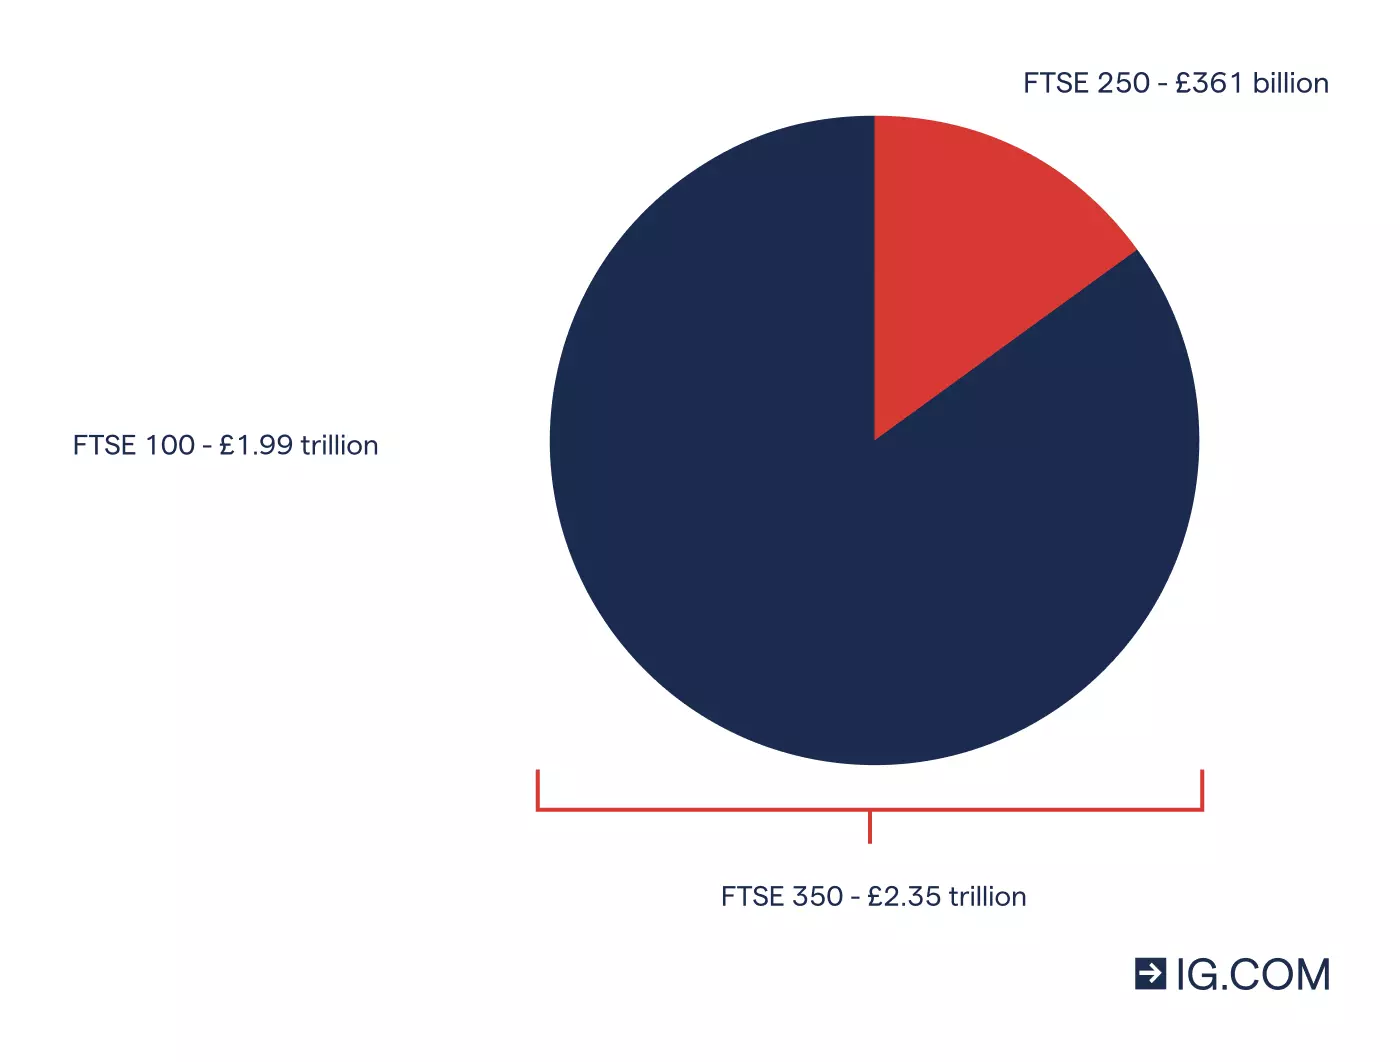 Pie chart showing the total value of the FTSE 350, which is around 2.35 trillion pounds, and the split between the FTSE 100 and the FTSE 250, which equals 1.99 trillion and 361 billion respectively.